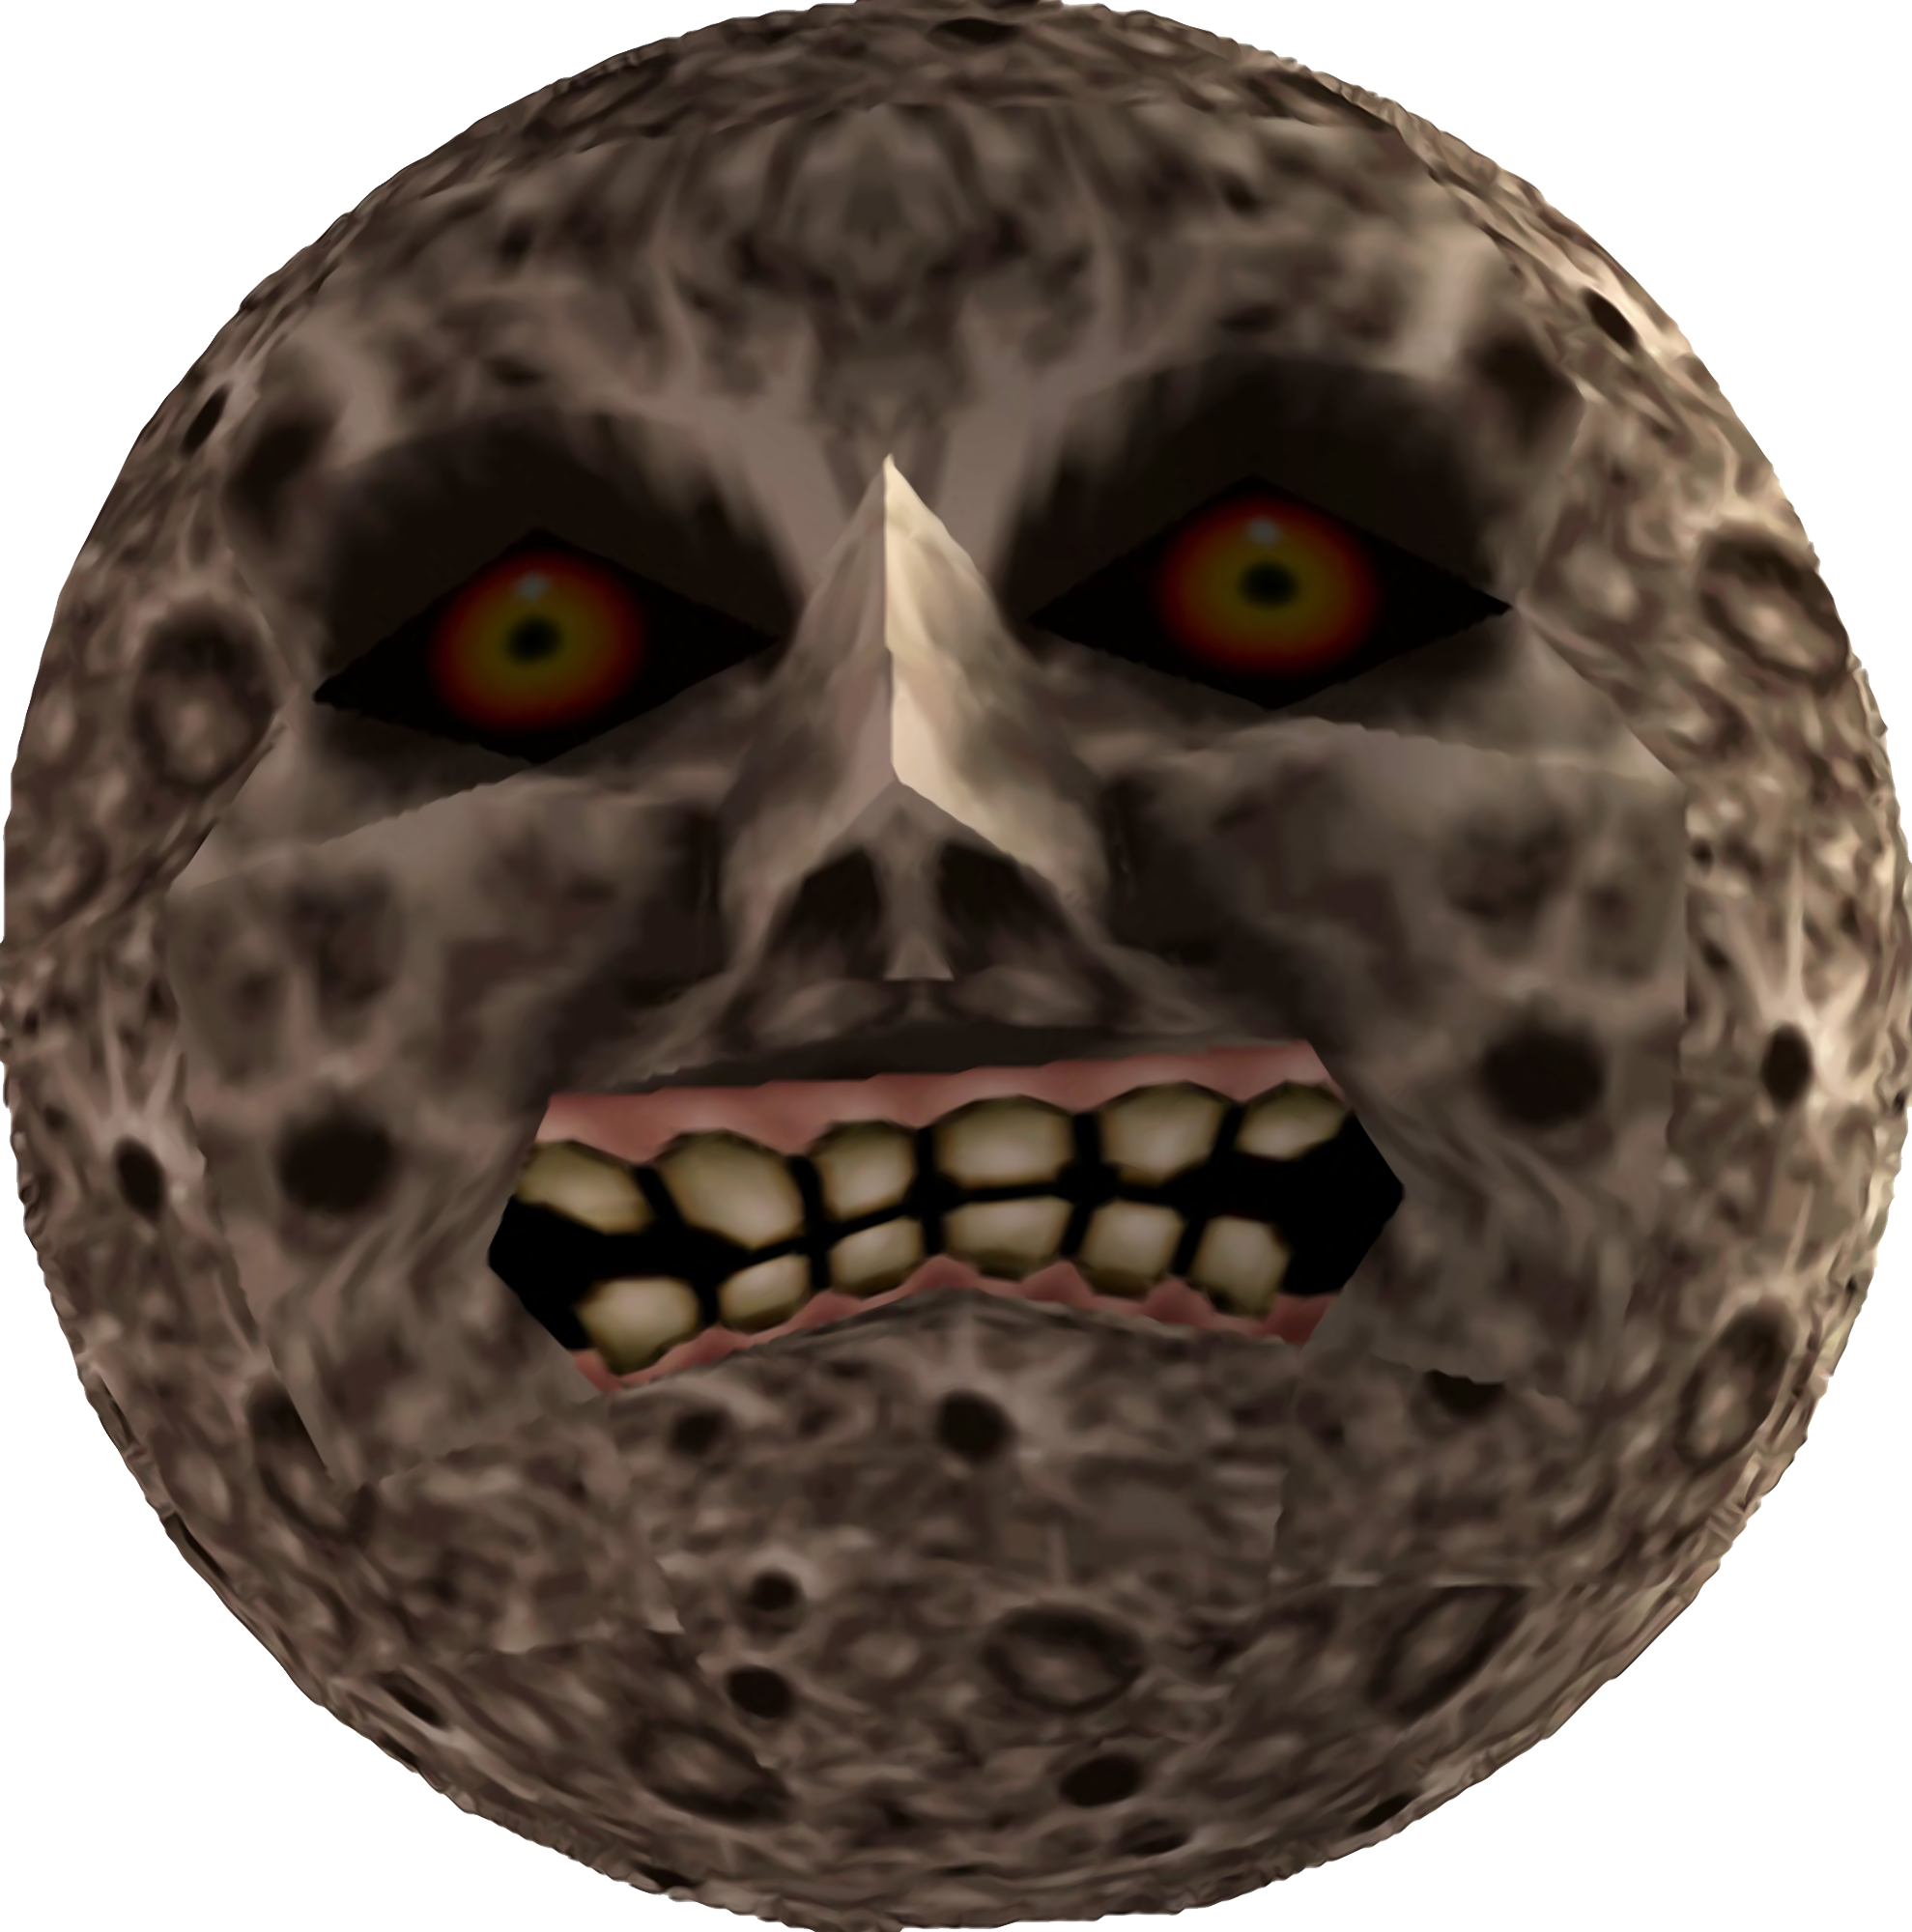 download moon from majoras mask render majora s mask moon png image with no background pngkey com download moon from majoras mask render